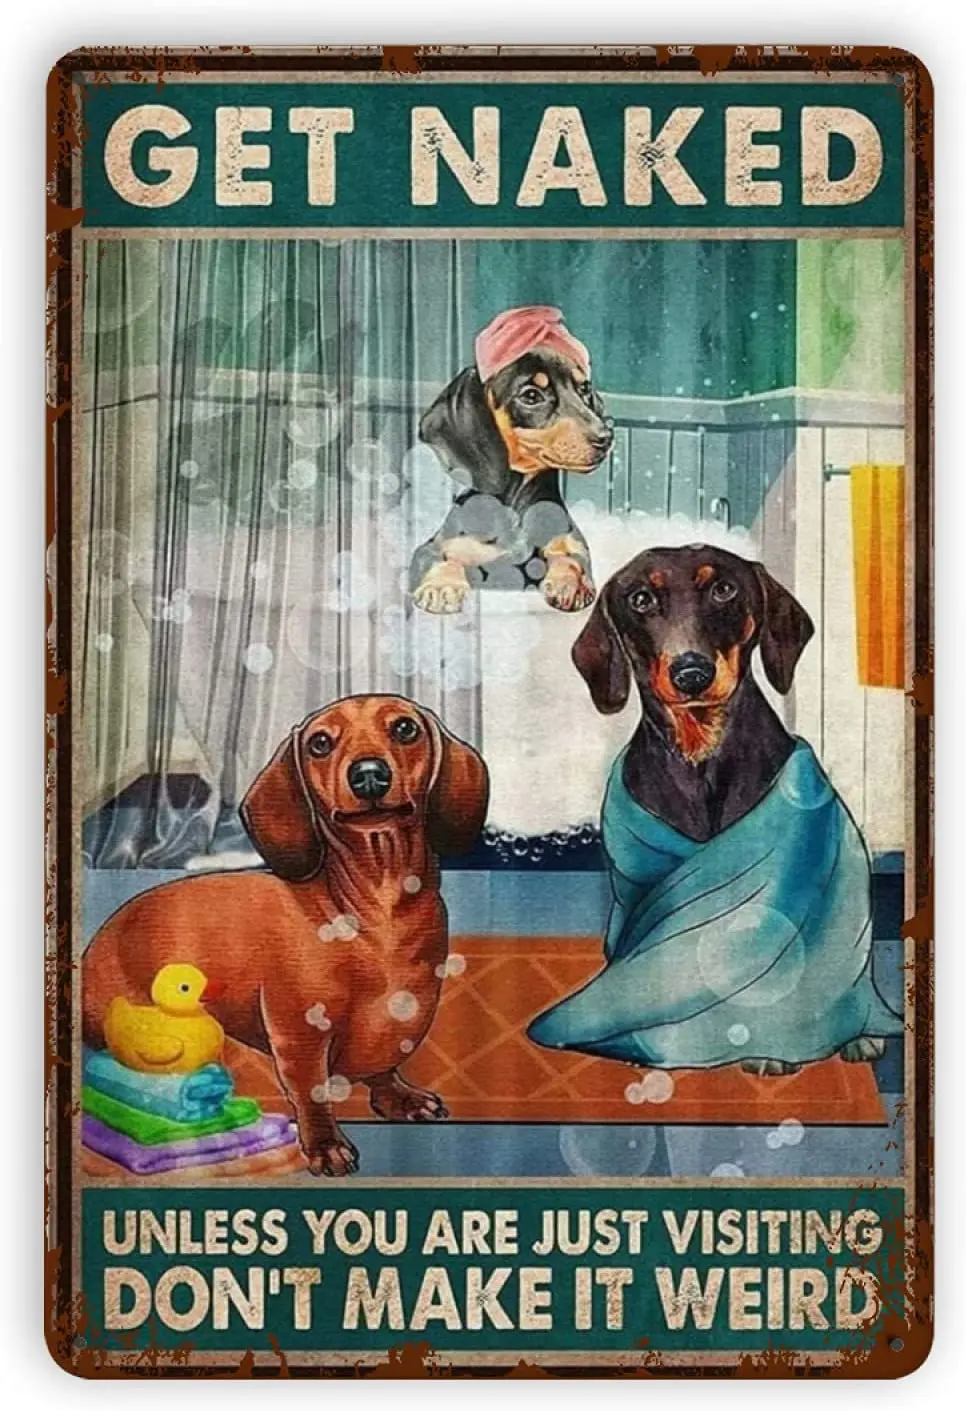 

Baby Kleidung Weant Metal Vintage Tin Signs Dachshund Dogs Get Naked Funny Wall Decor for Home Bars Pubs Cafes Bathroom Retro